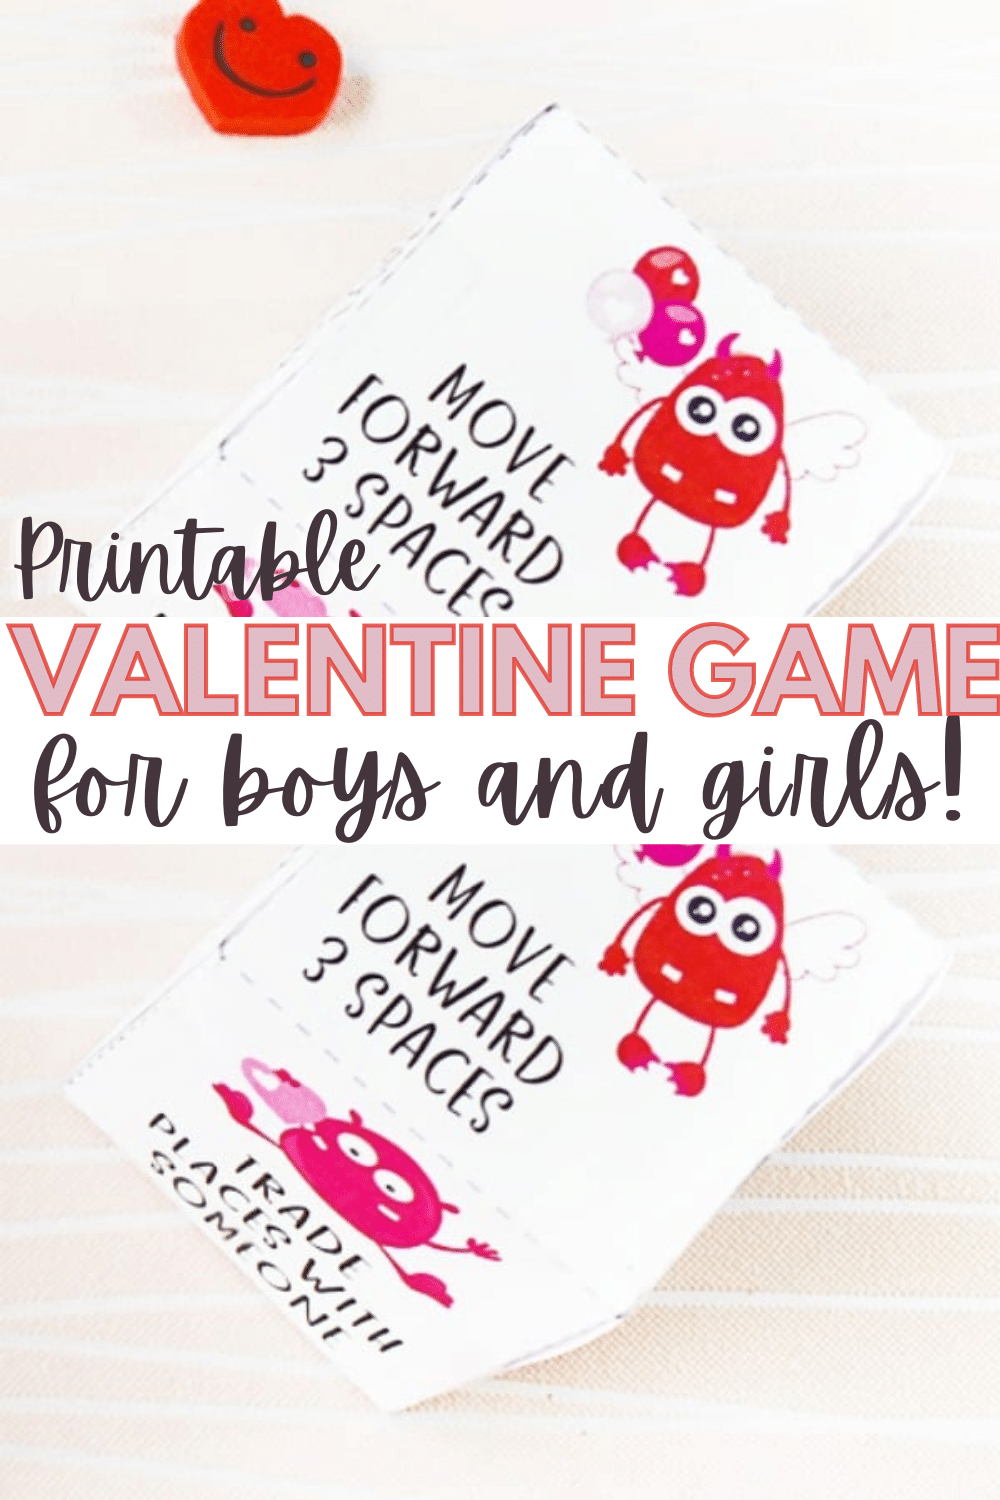 This free Printable Valentine Game is colorful and easy to play. This fun Valentine's Day game is perfect to entertain kids at school class parties. #printable #valentinesday #freeprintables via @wondermomwannab